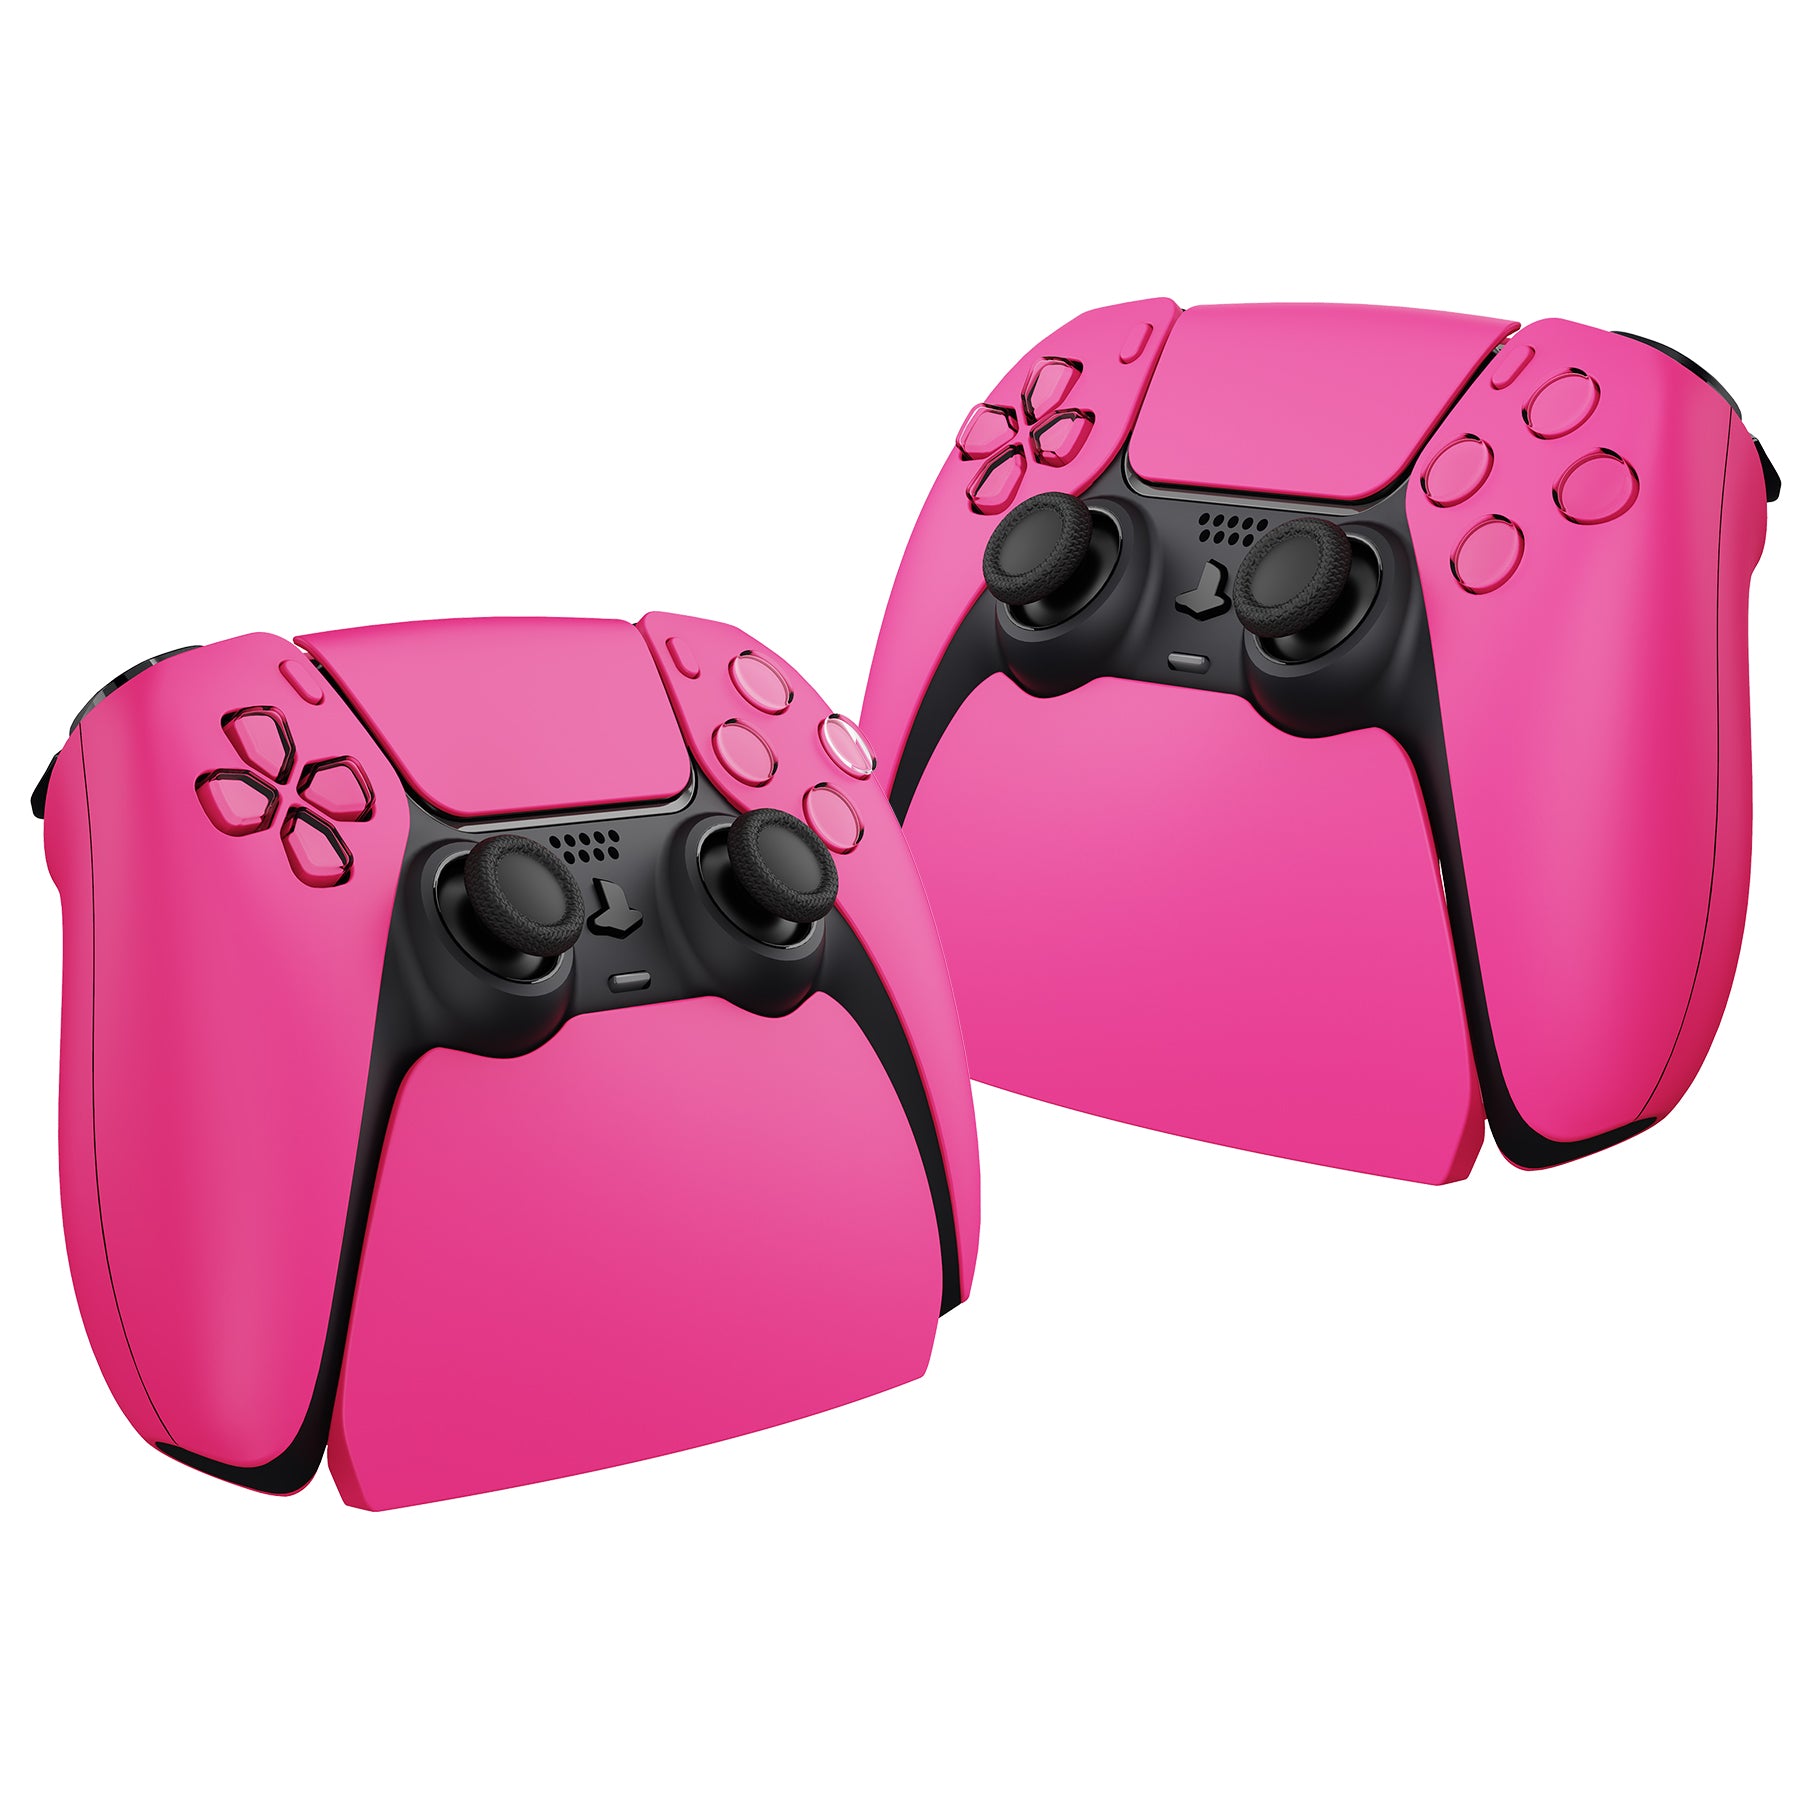 PlayVital Nova Pink Controller Display Stand for PS5, Gamepad